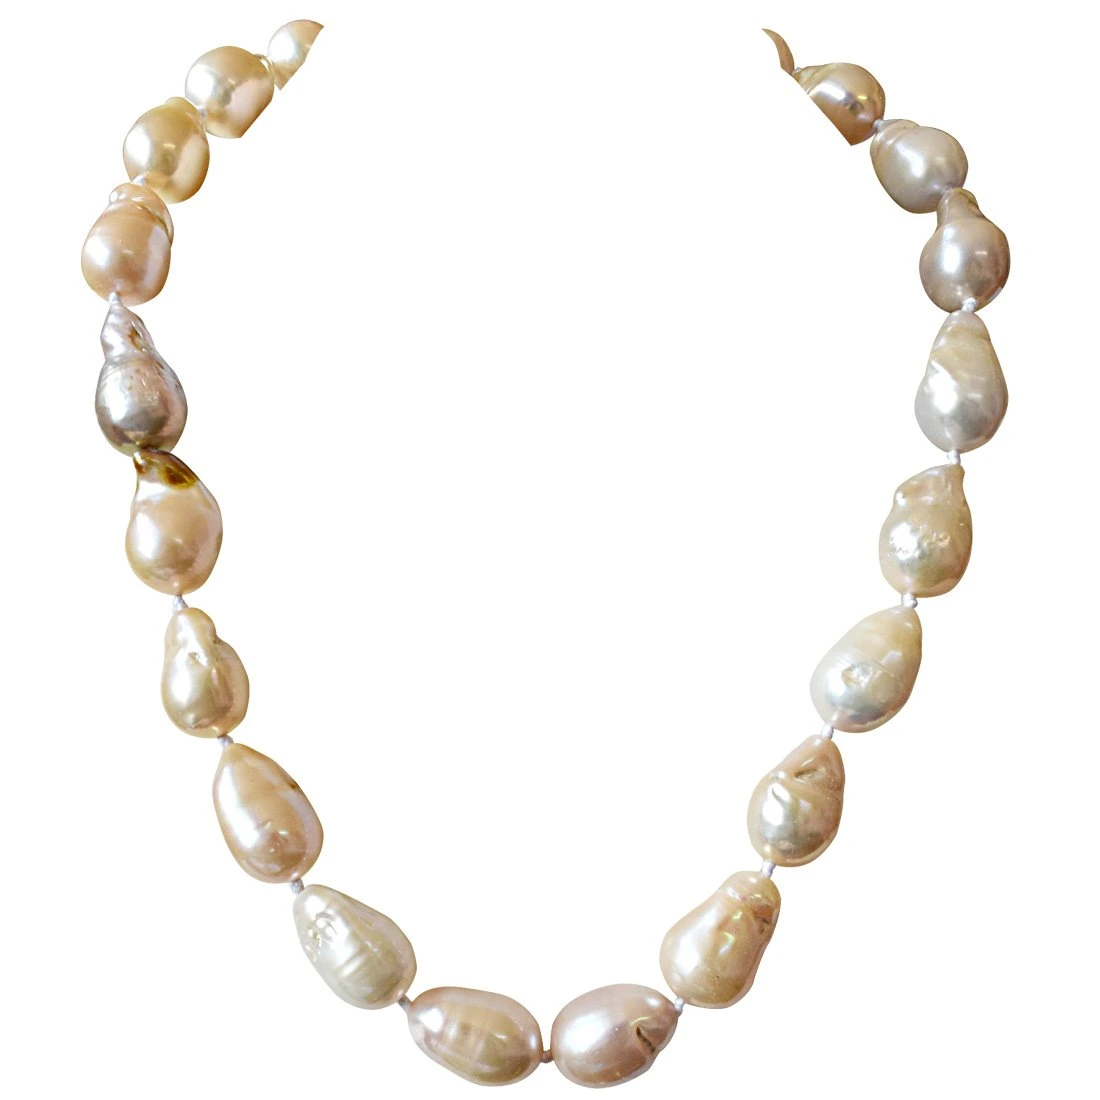 The Essence of Elegance: The 418.93cts Peach Baroque Pearl Necklace (SN835-418.93cts)